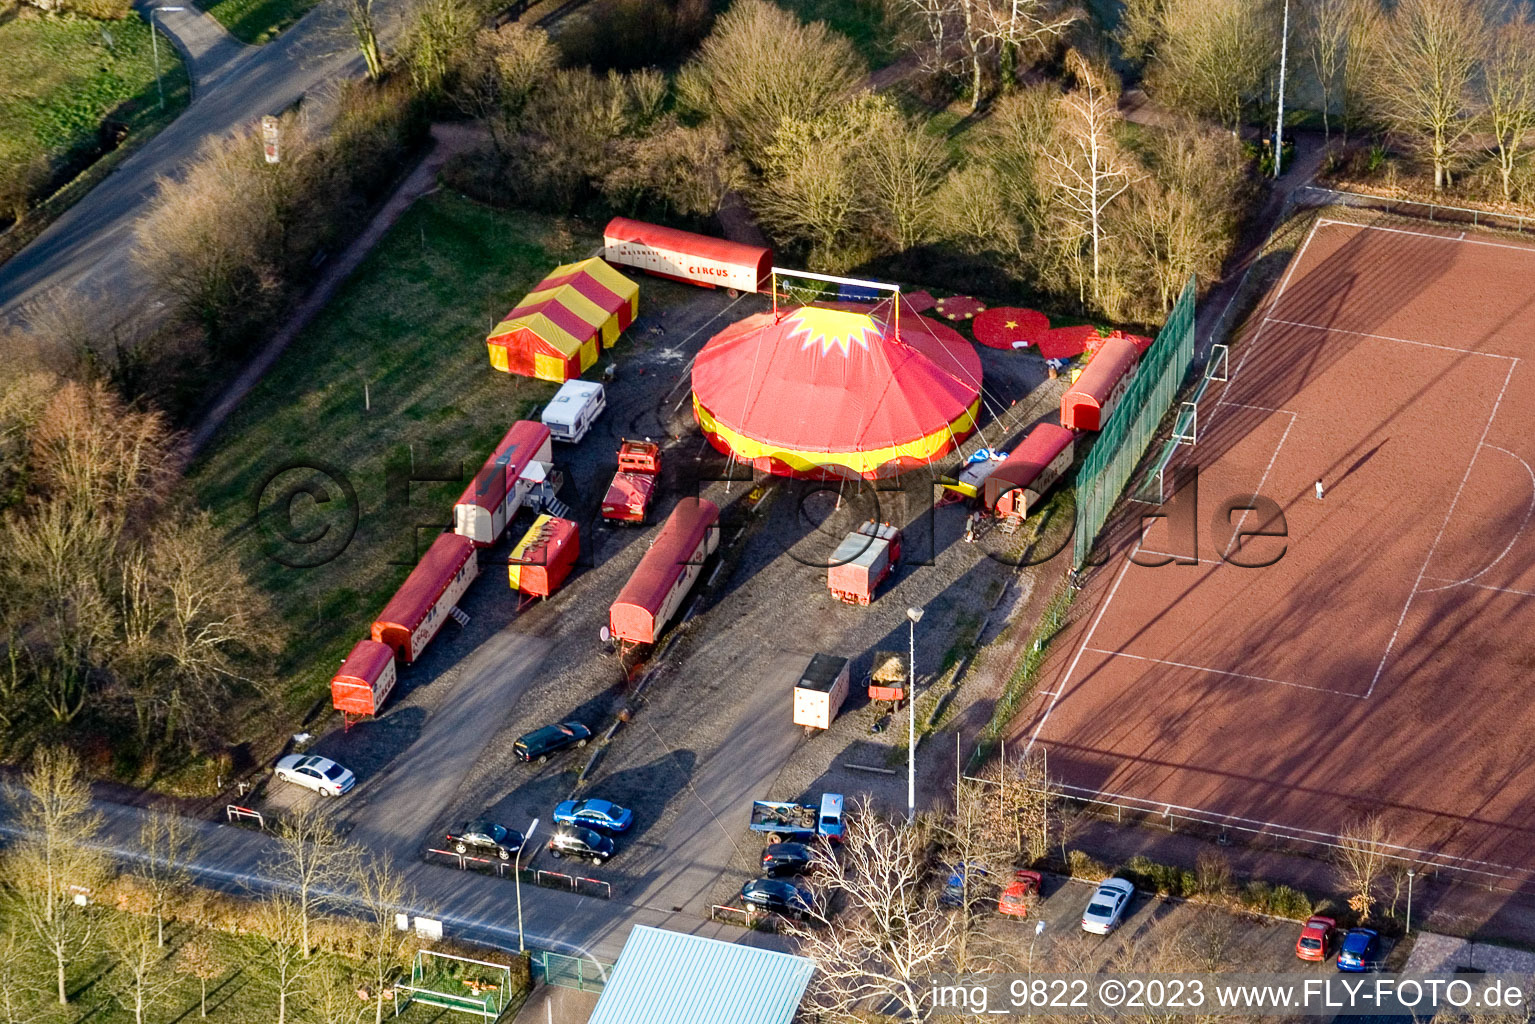 Circus wisdom at the sports field in Kandel in the state Rhineland-Palatinate, Germany seen from above